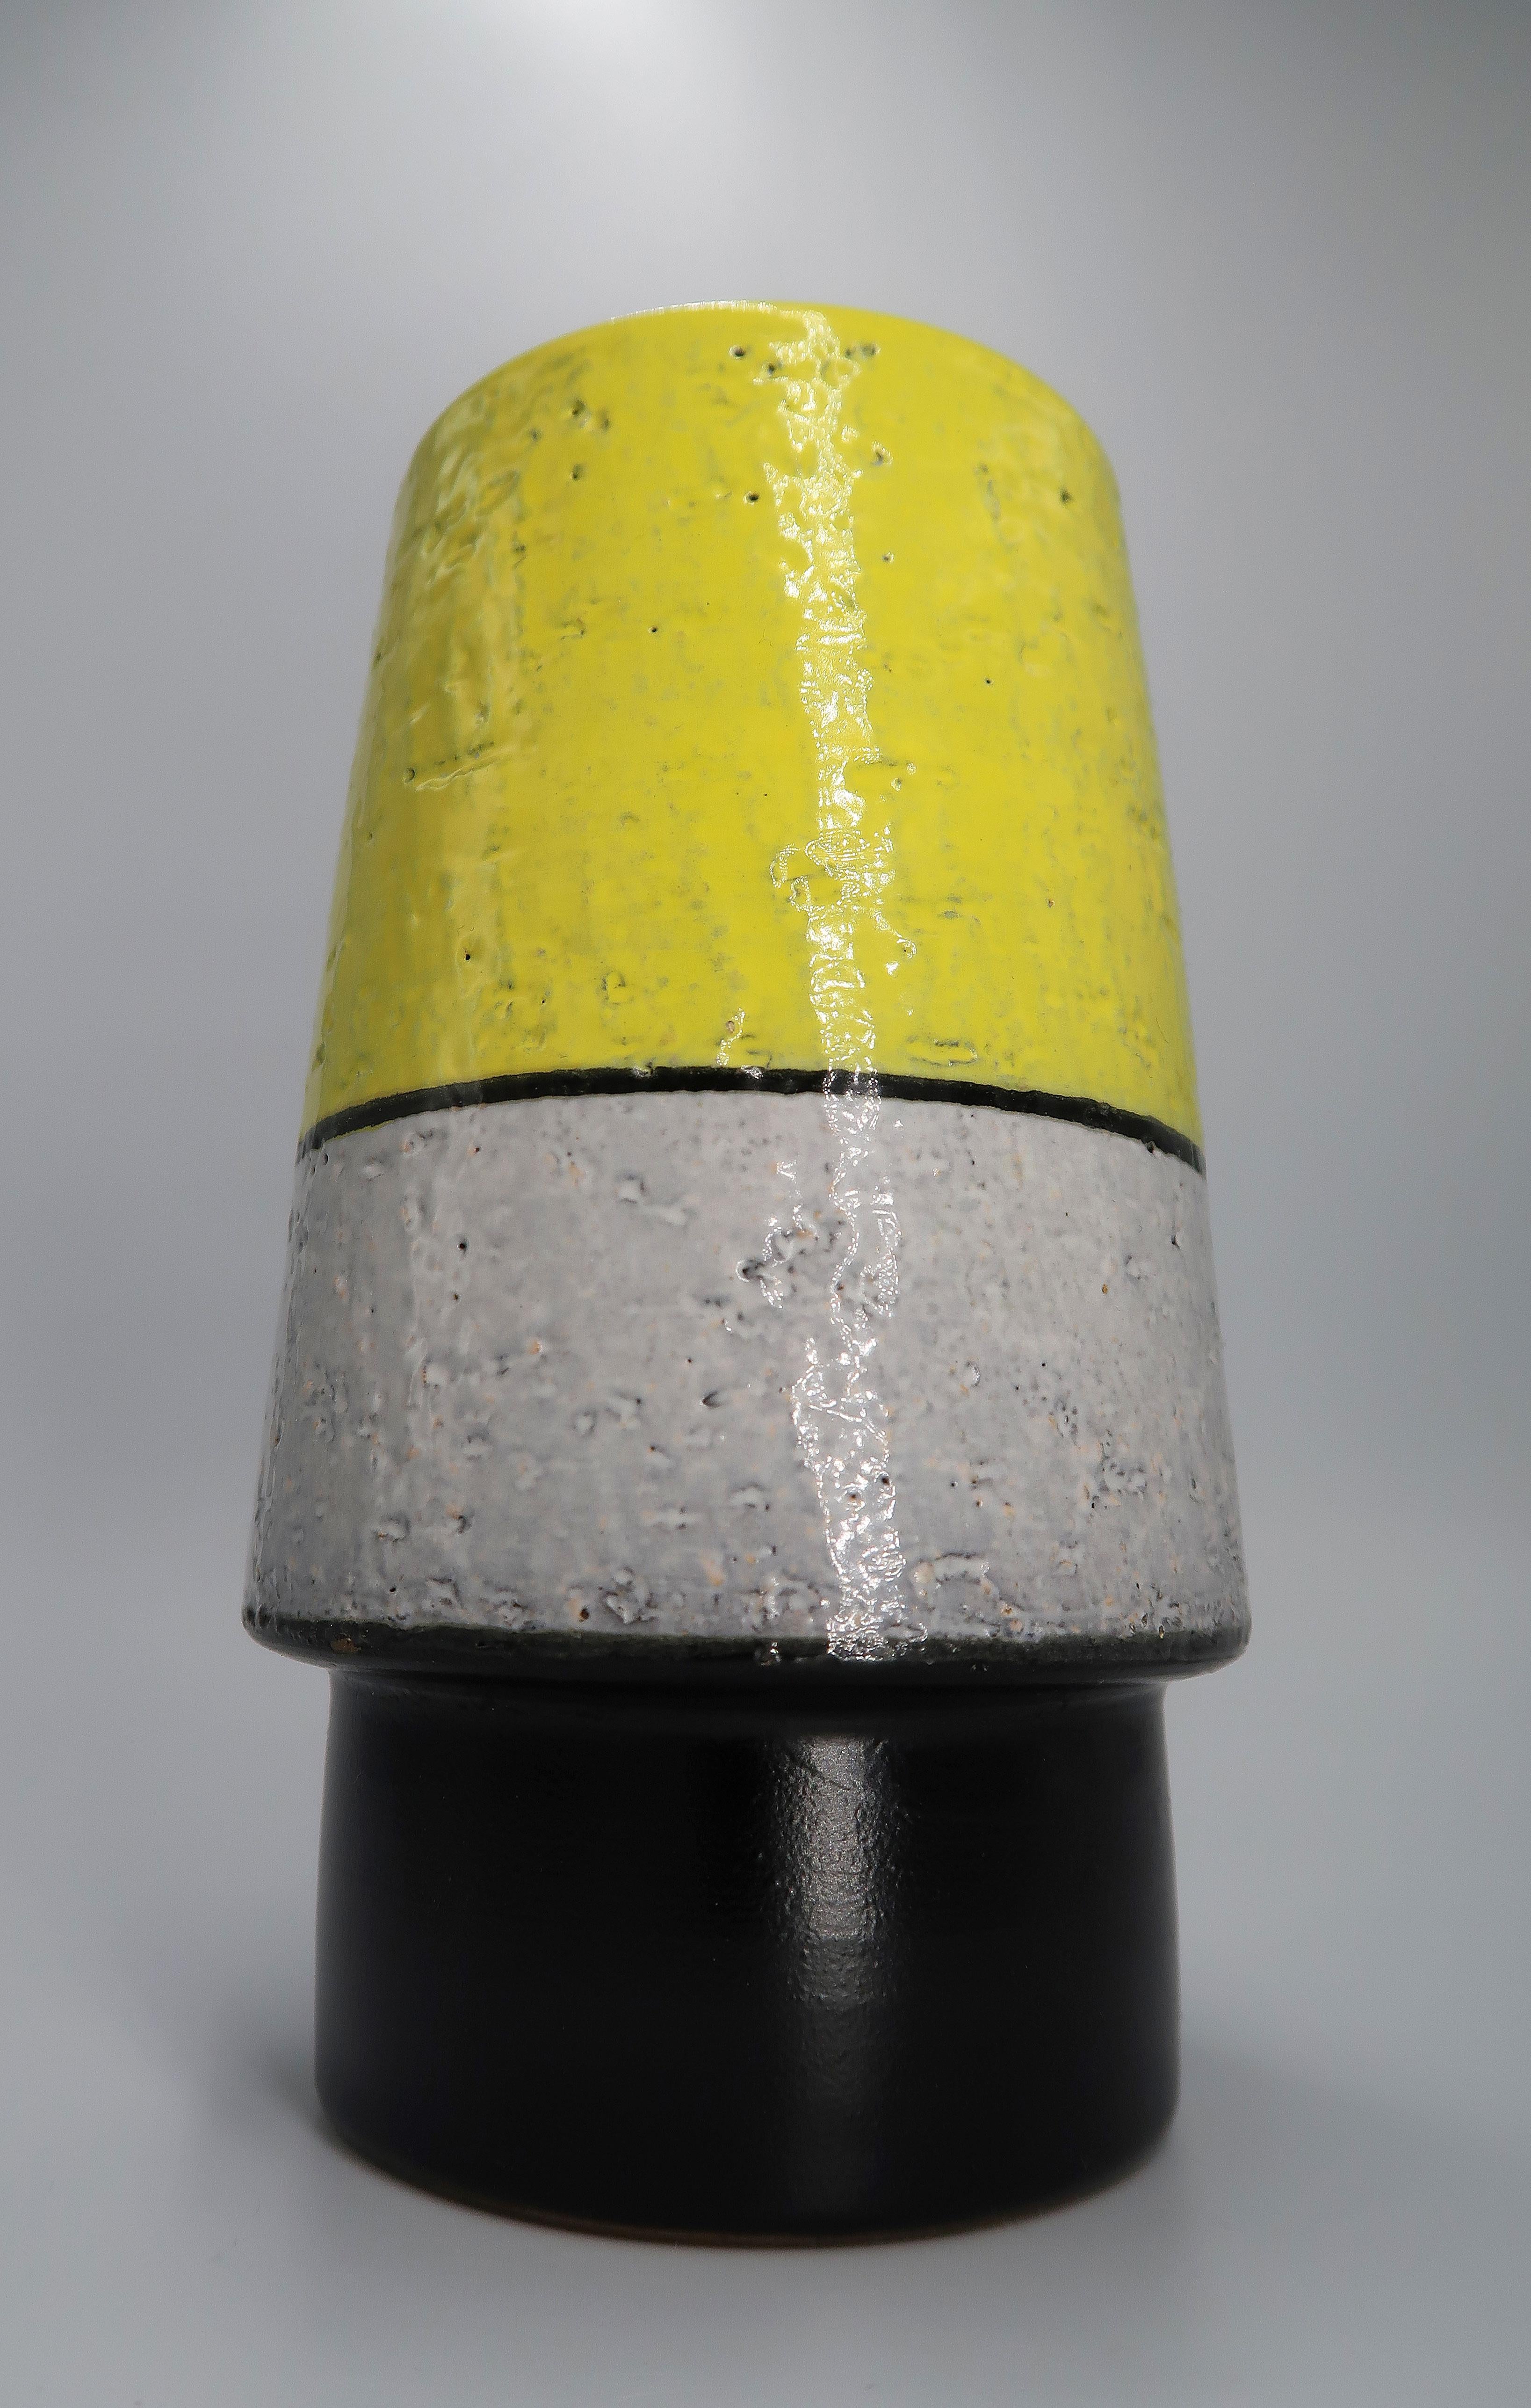 Stunning bright yellow, warm grey and smooth black Swedish Mid-Century Modern ceramic vase by designer Mari Simmulson. Manufactured by Upsala Ekeby in the 1960s. Signed and stamped under base. Model 431/441. In beautiful condition. 